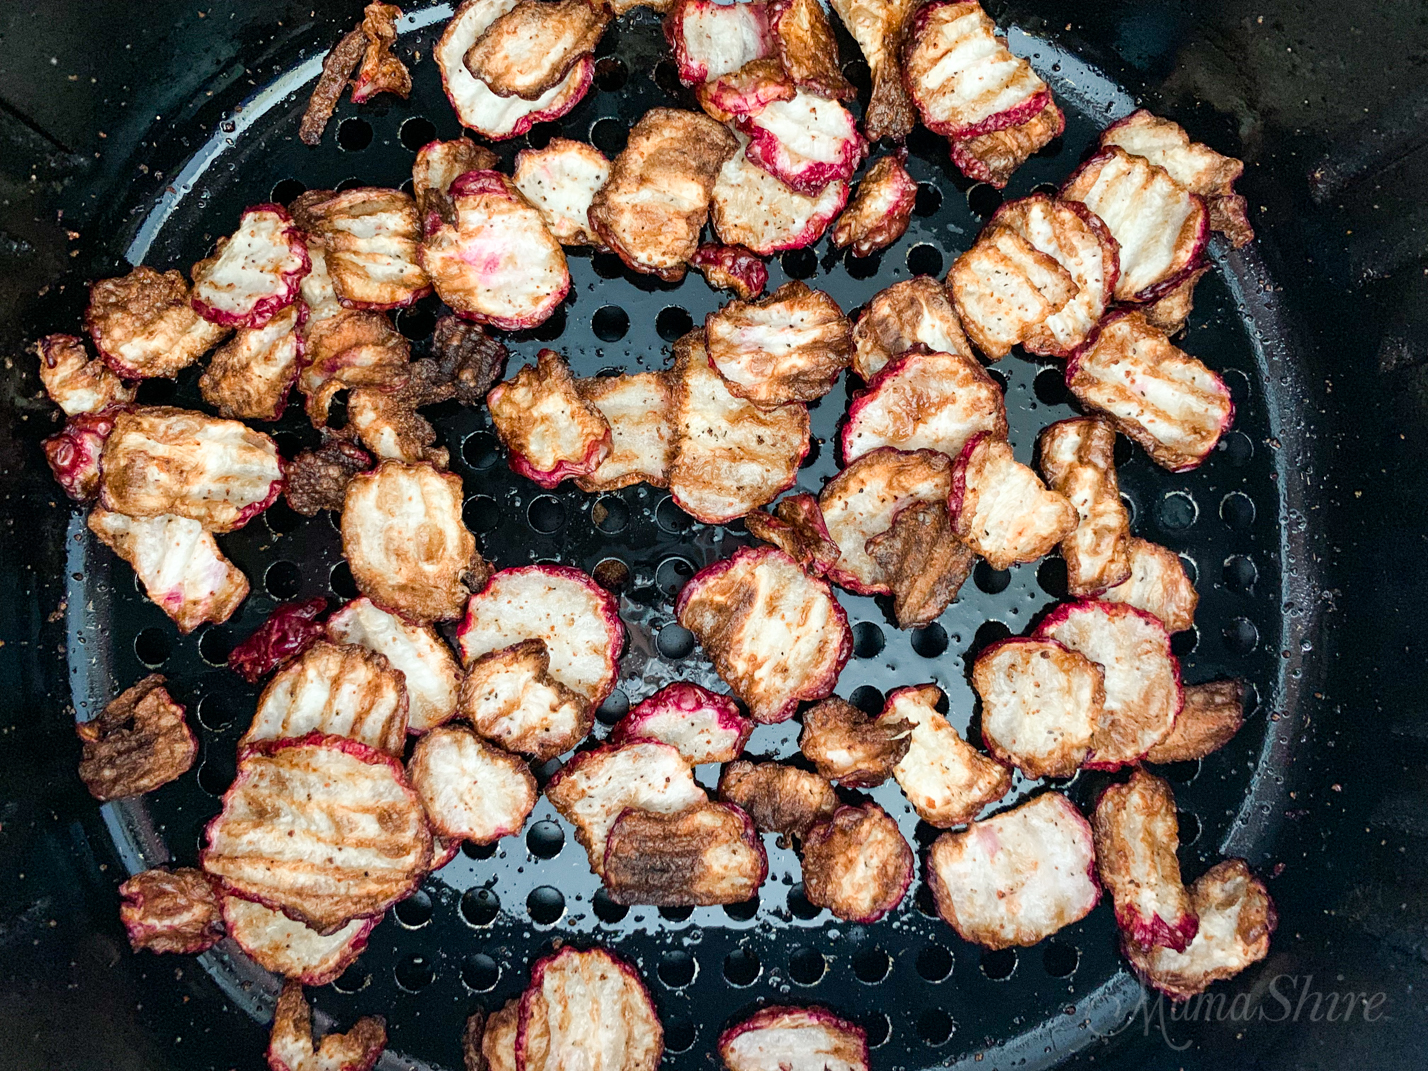 Air Fryer Radish Chips in the basket of the air fryer.